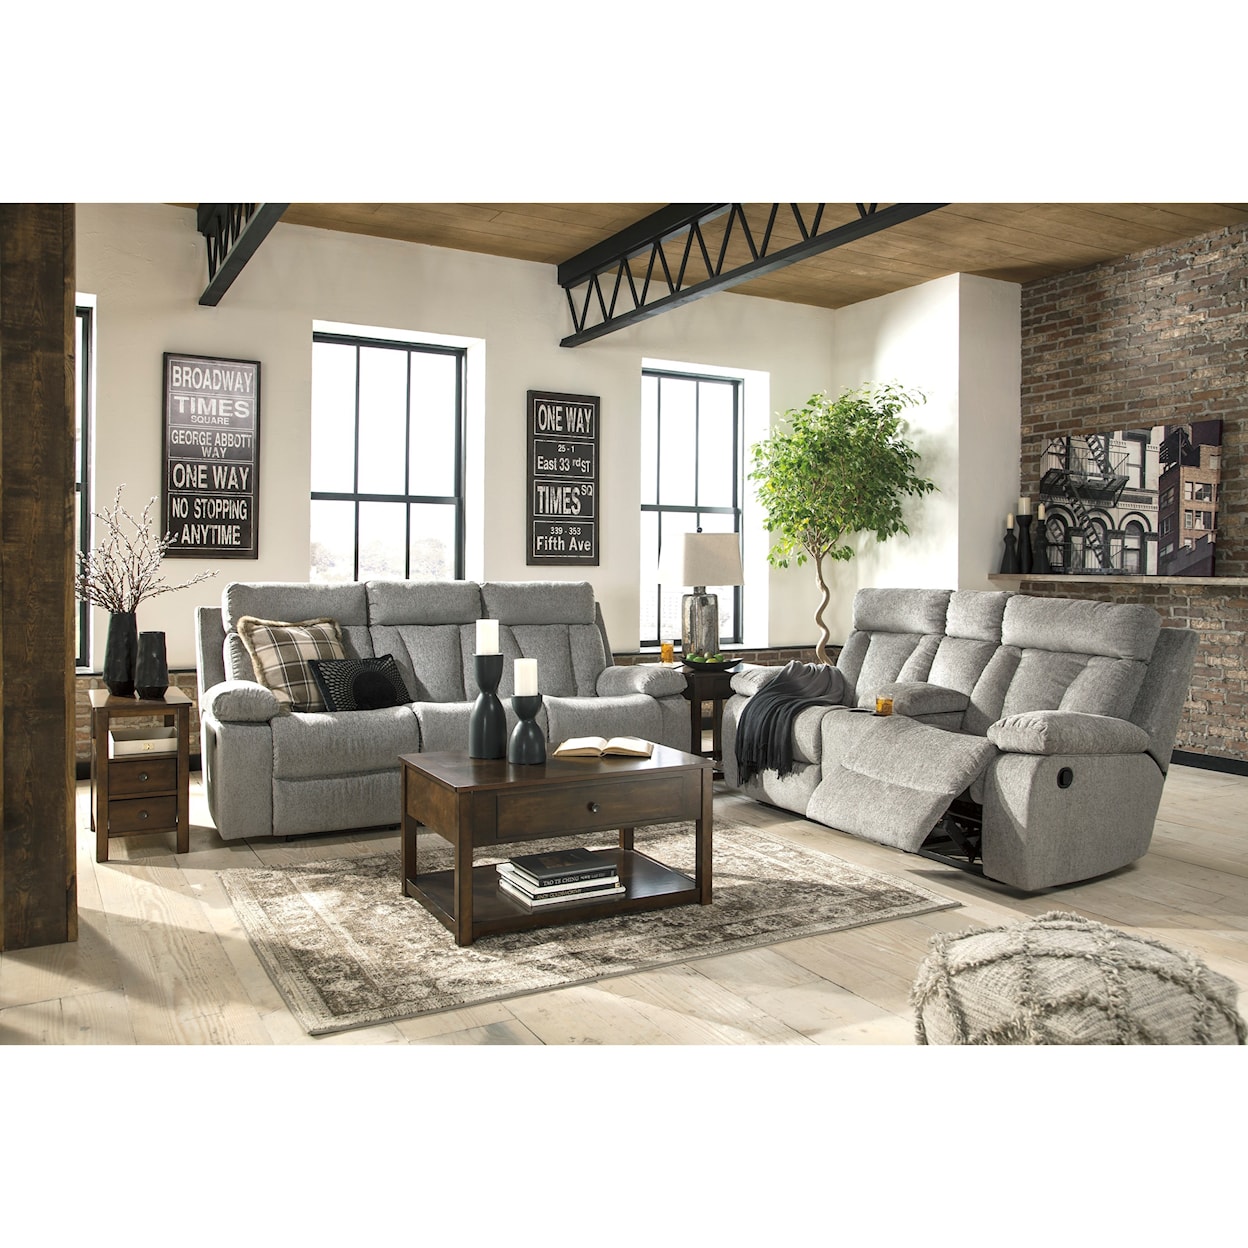 Signature Design by Ashley Furniture Mitchiner Reclining Living Room Group